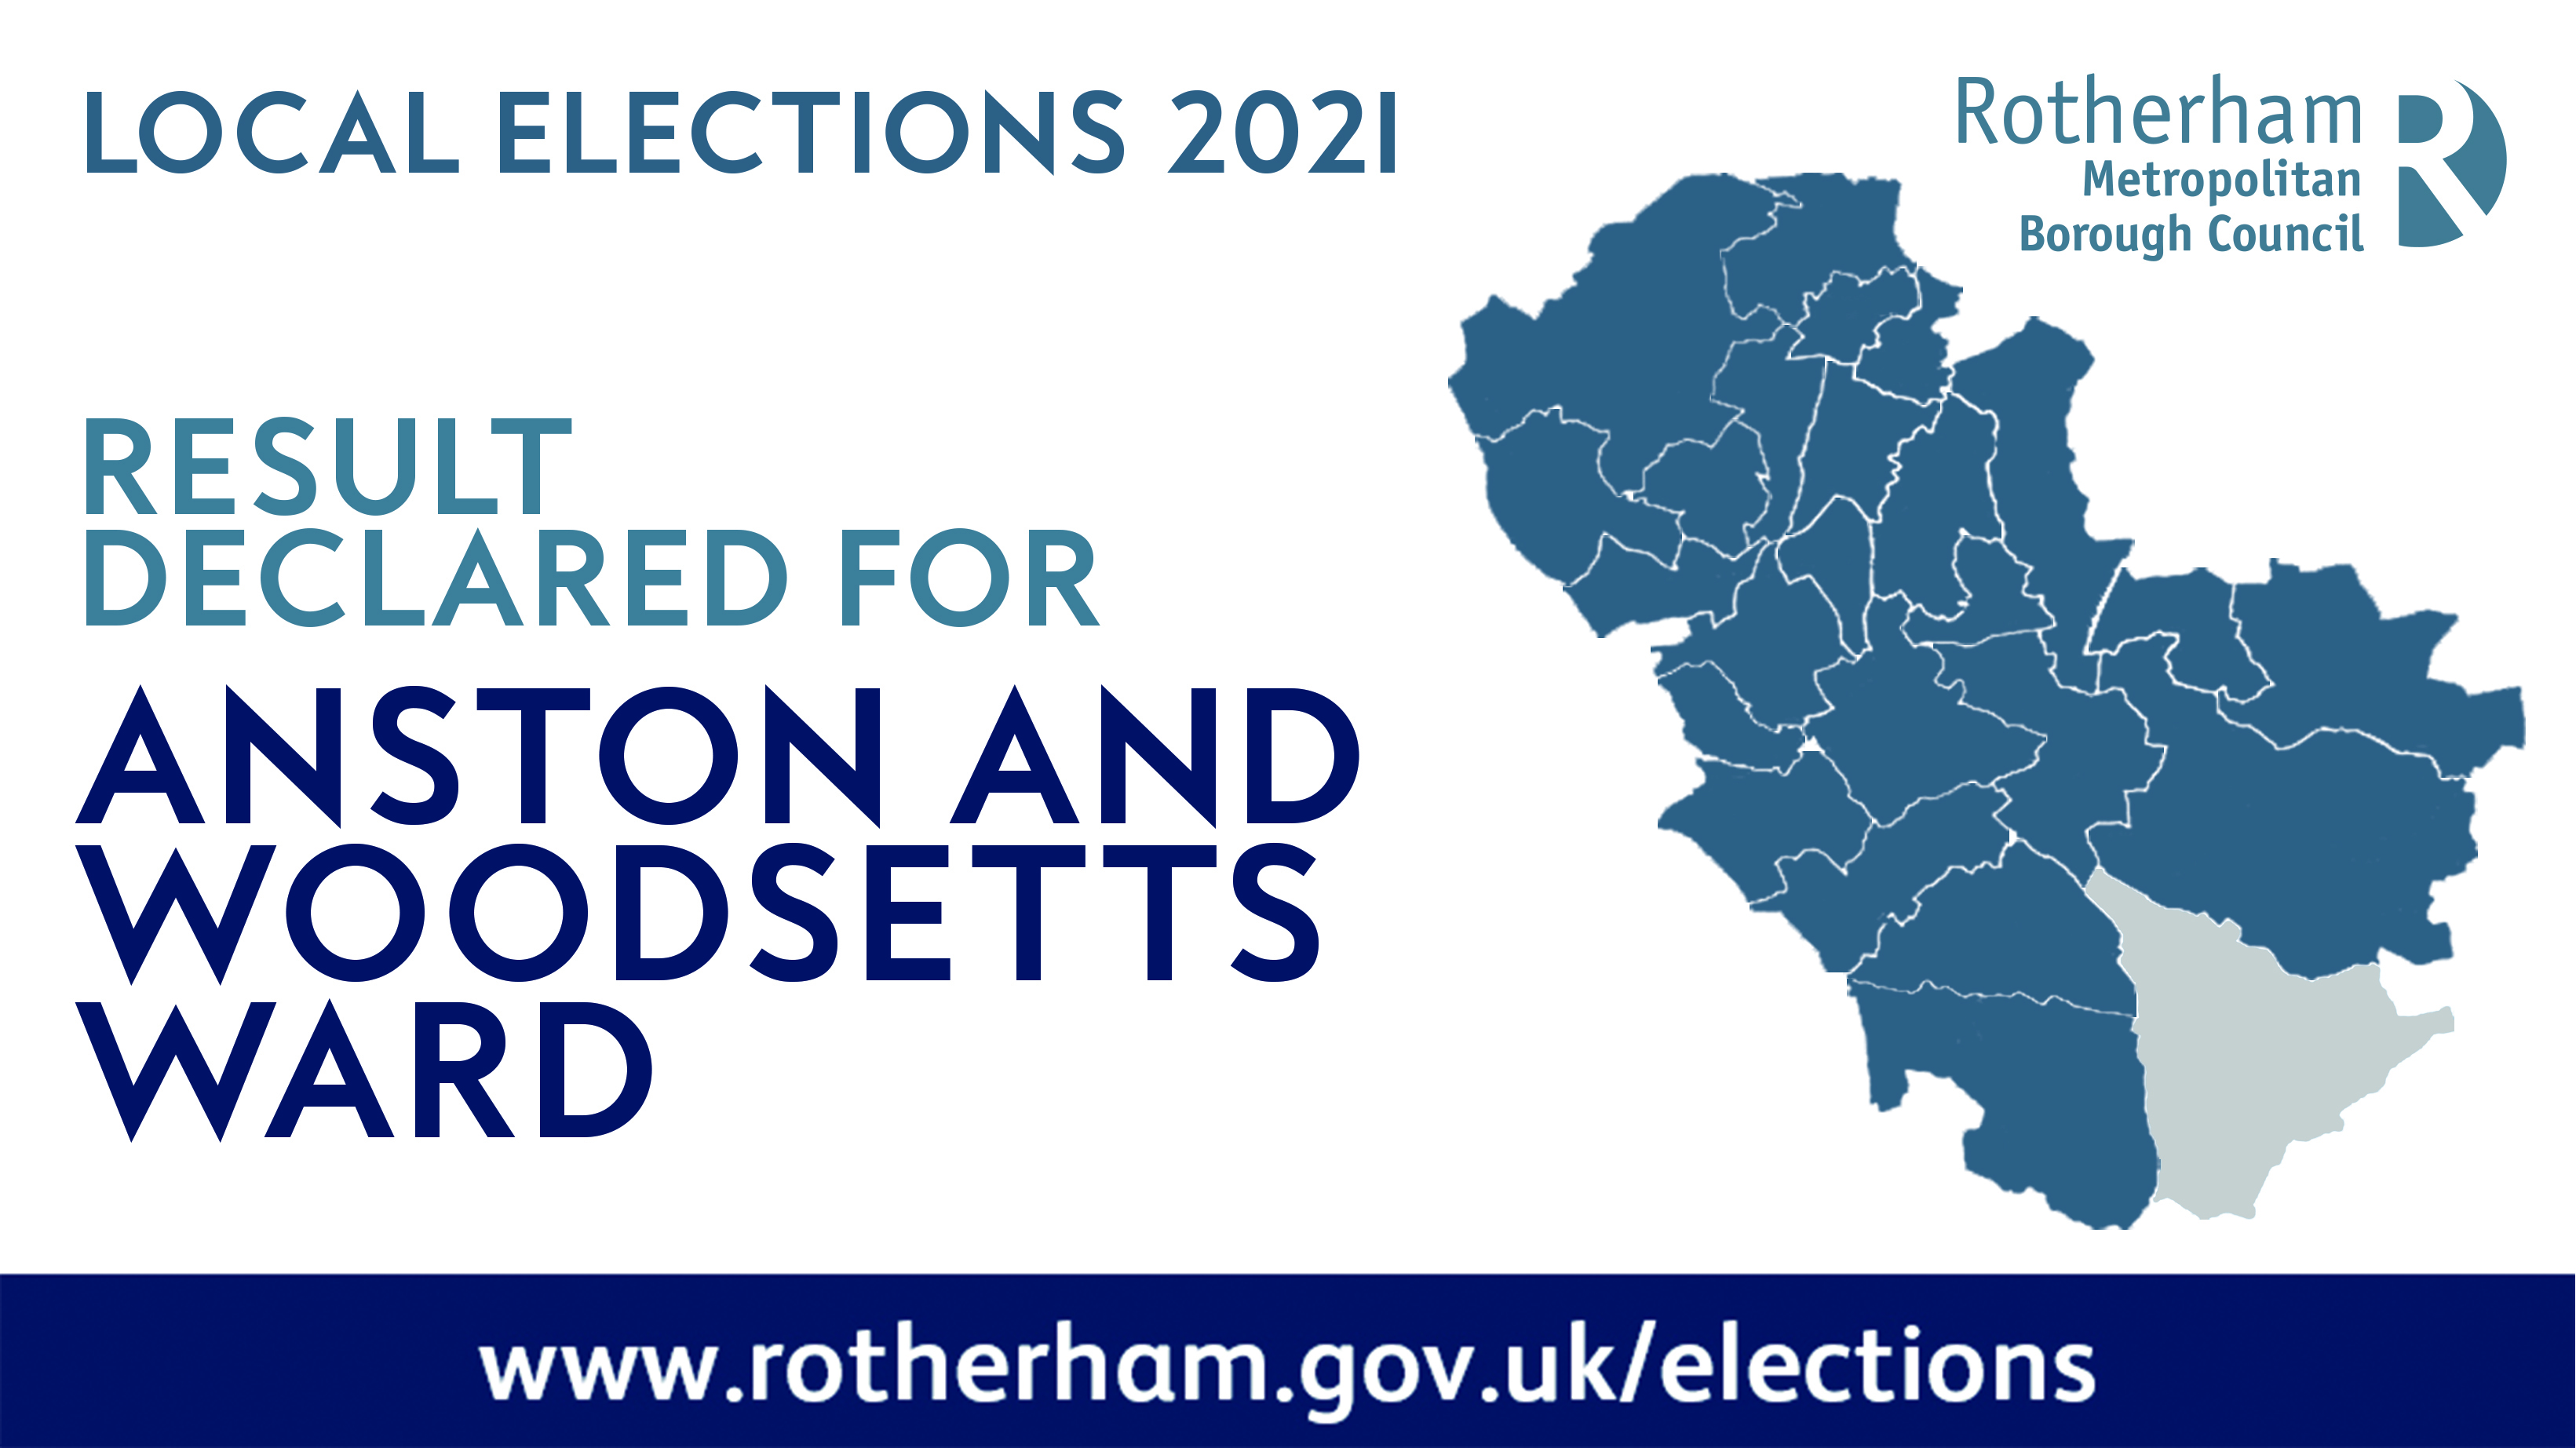 Anston and Woodsetts ward result declared